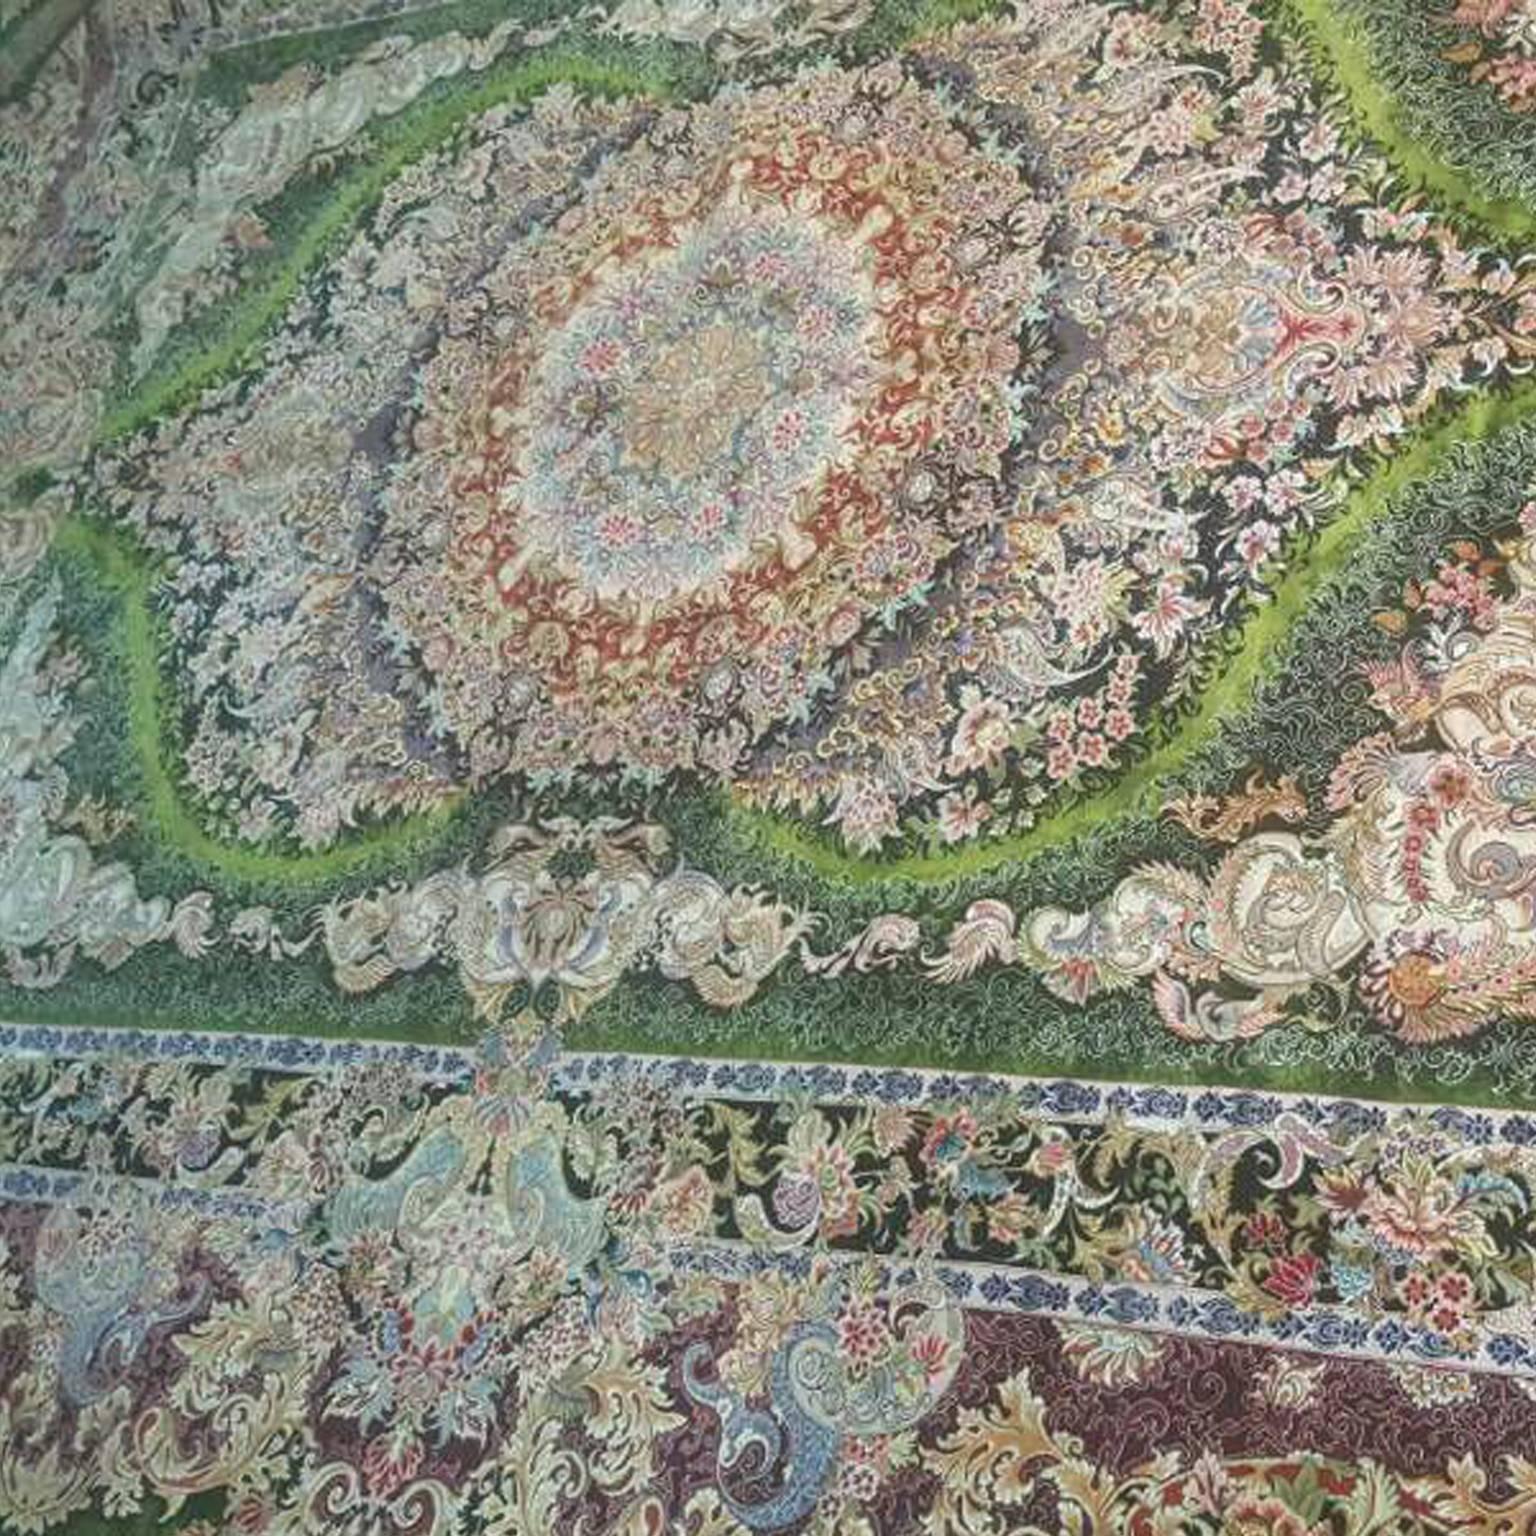 KPSI: 556
Origin: Tabriz, Iran
Composition: Silk and wool 
Size: 350cm x 250cm
Tabrizi carpets are well-known for their most diverse designs worldwide, and they are renowned for their vibrant and intricate floral presentations. 

This Tabrizi